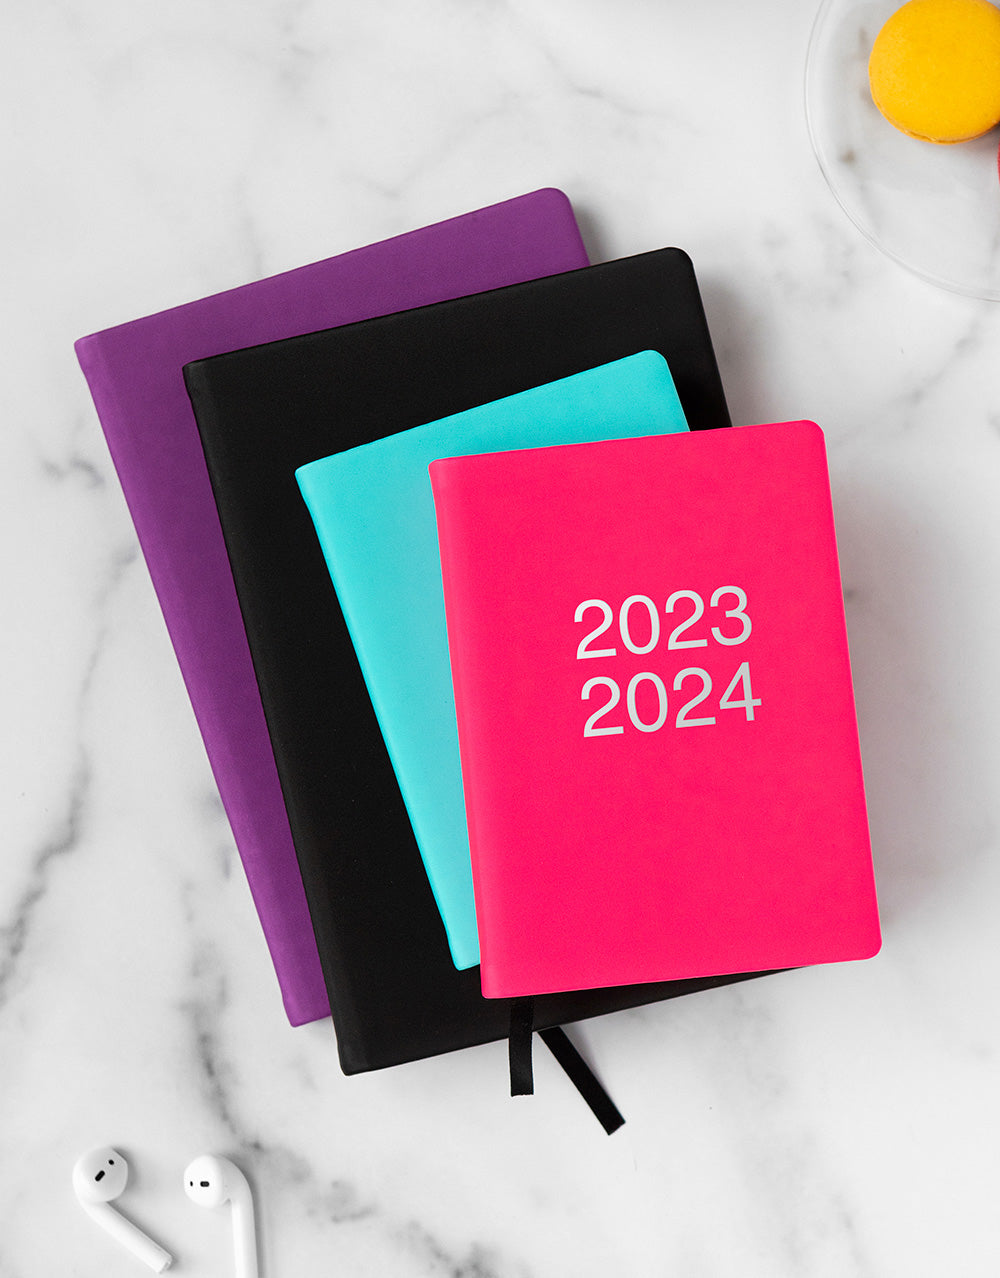 Dazzle A5 Week to View Planner 2023-2024 - Multilanguage - Turquoise - Letts of London#color_turquoise